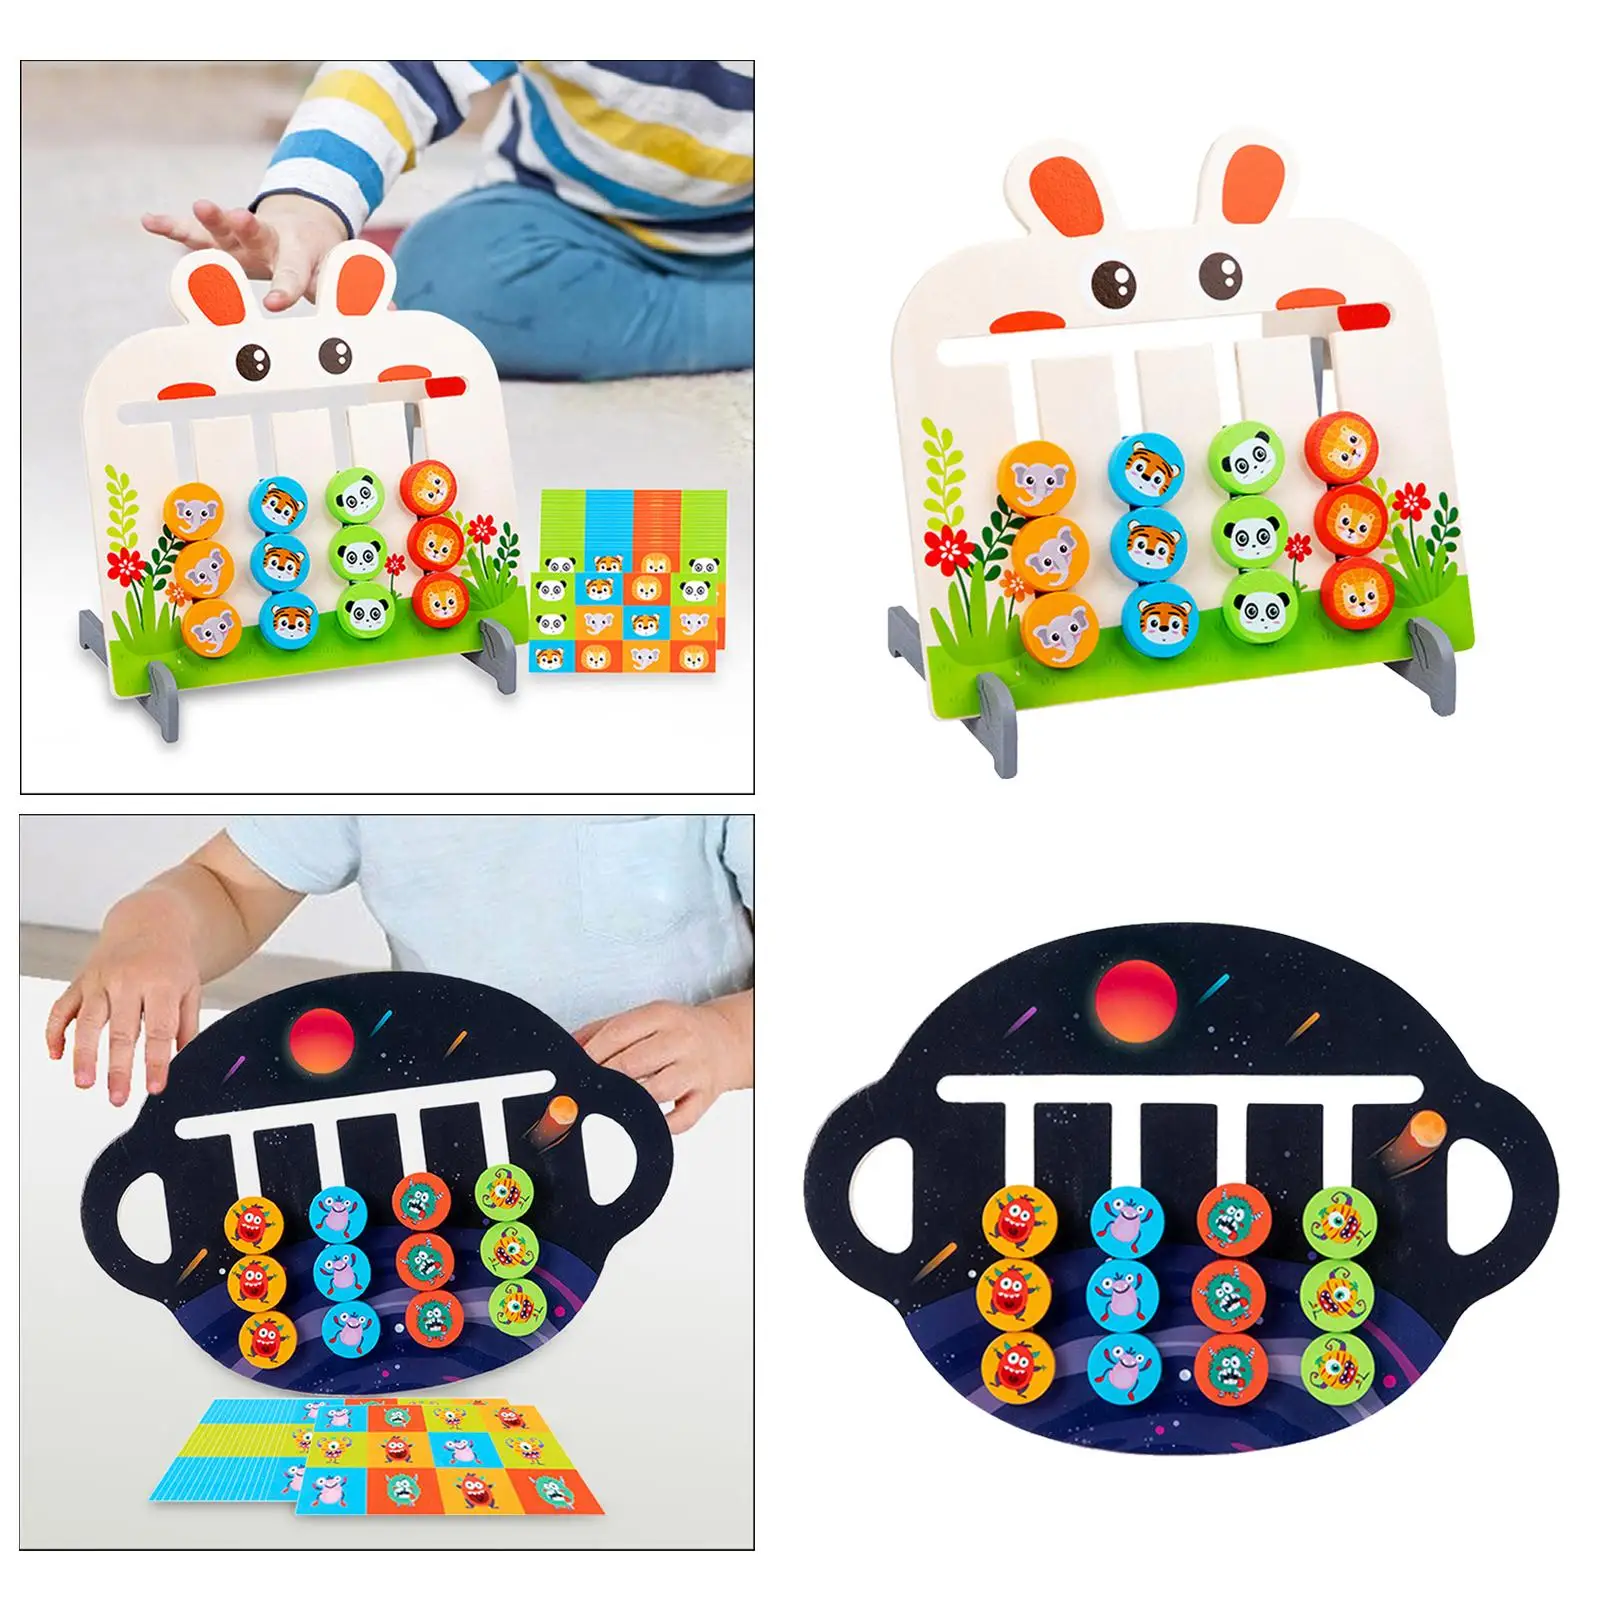 Sliding Puzzle Toy Development Toys Sorting Colors and Shapes for Gift